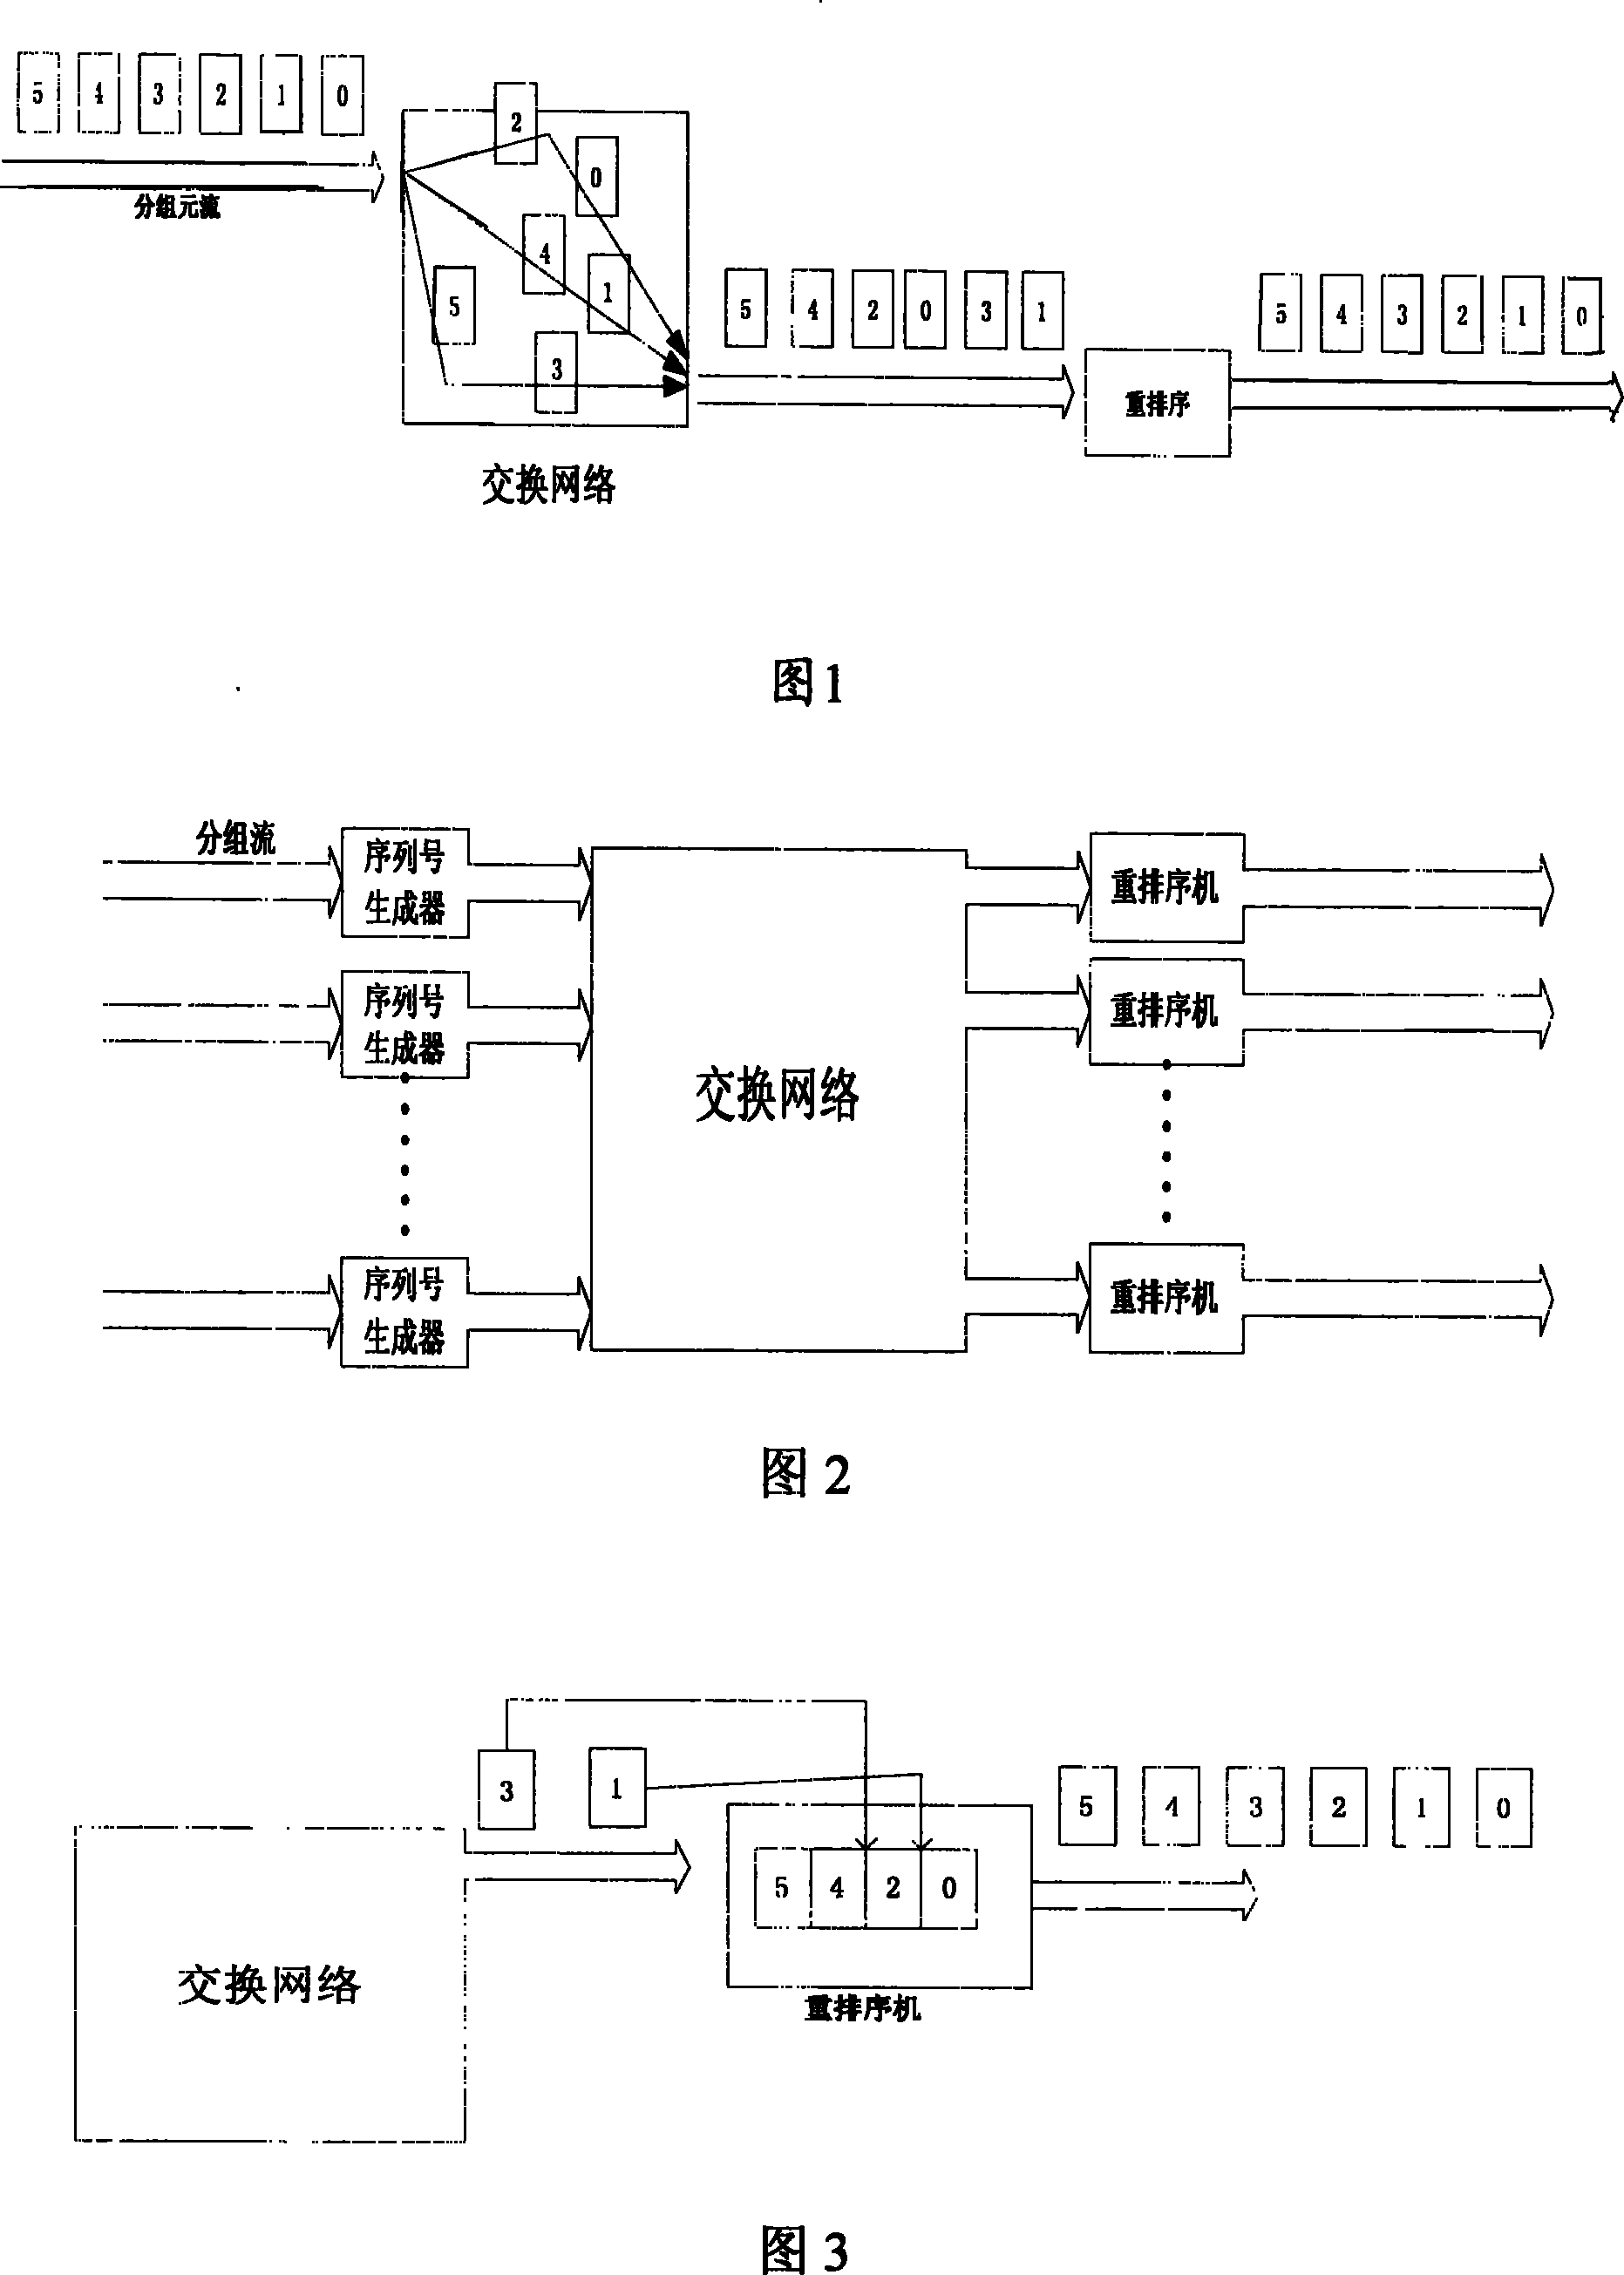 A packet resorting method and system